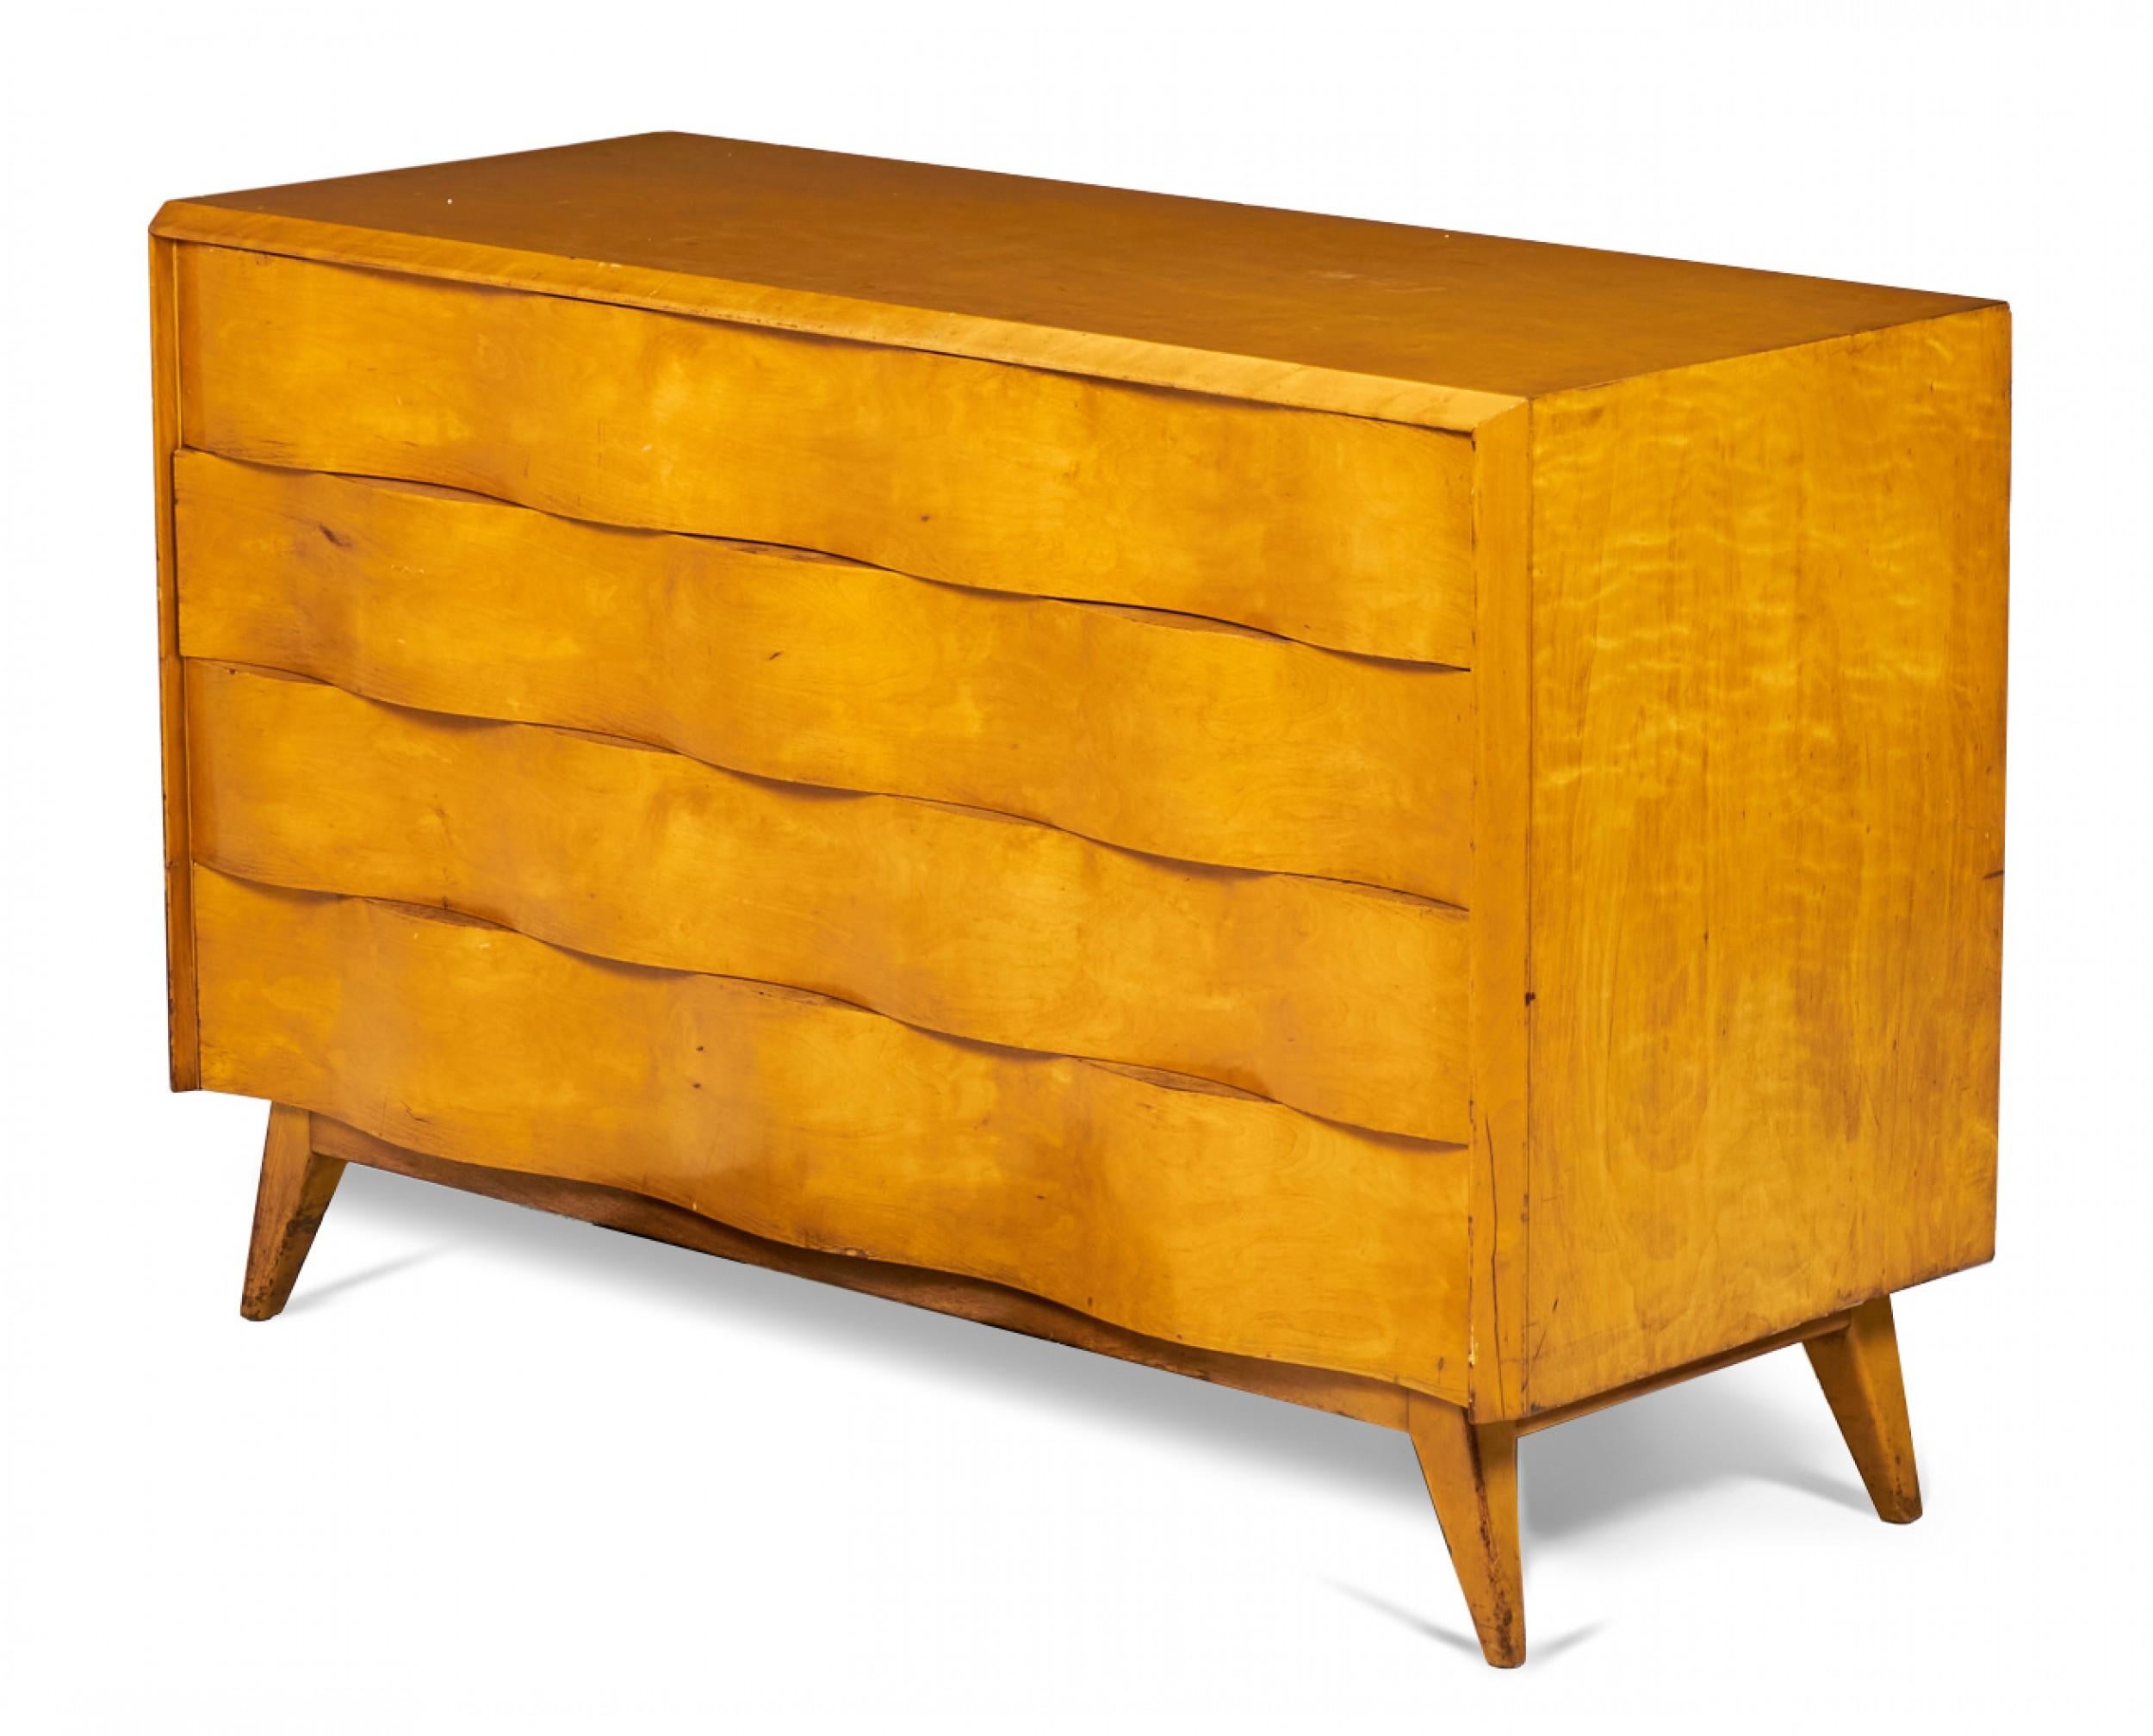 Swedish Mid-Century (1940s) wave front birchwood chest of drawers with four drawers in a birchwood case resting on four tapered angled legs. (EDMOND SPENCE)(Matching nightstands: DUF0141).